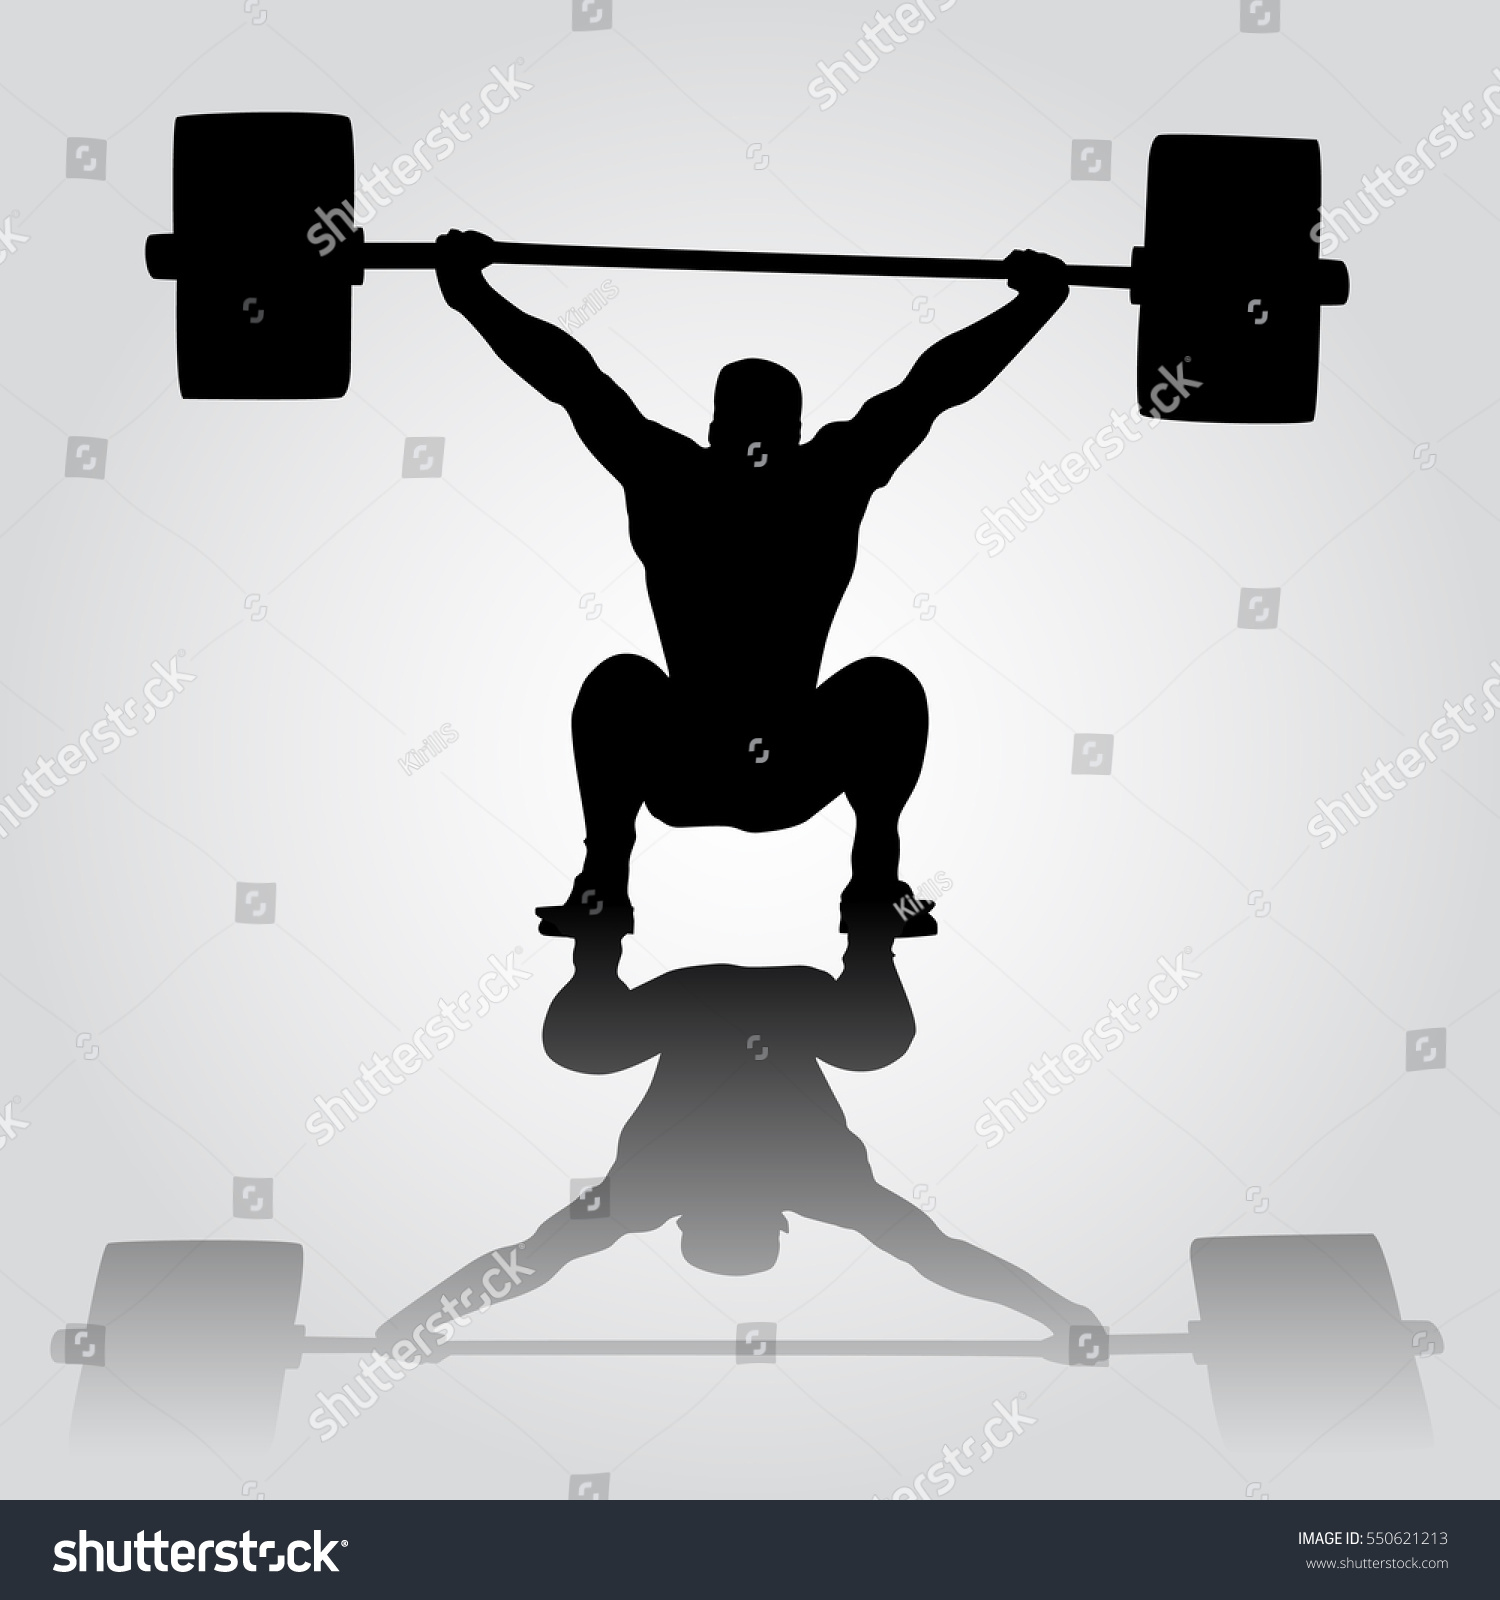 SVG of  Weightlifter is sitting with barbell. Snatch. silhouette of athlete doing snatch exercise. weightlifting. svg